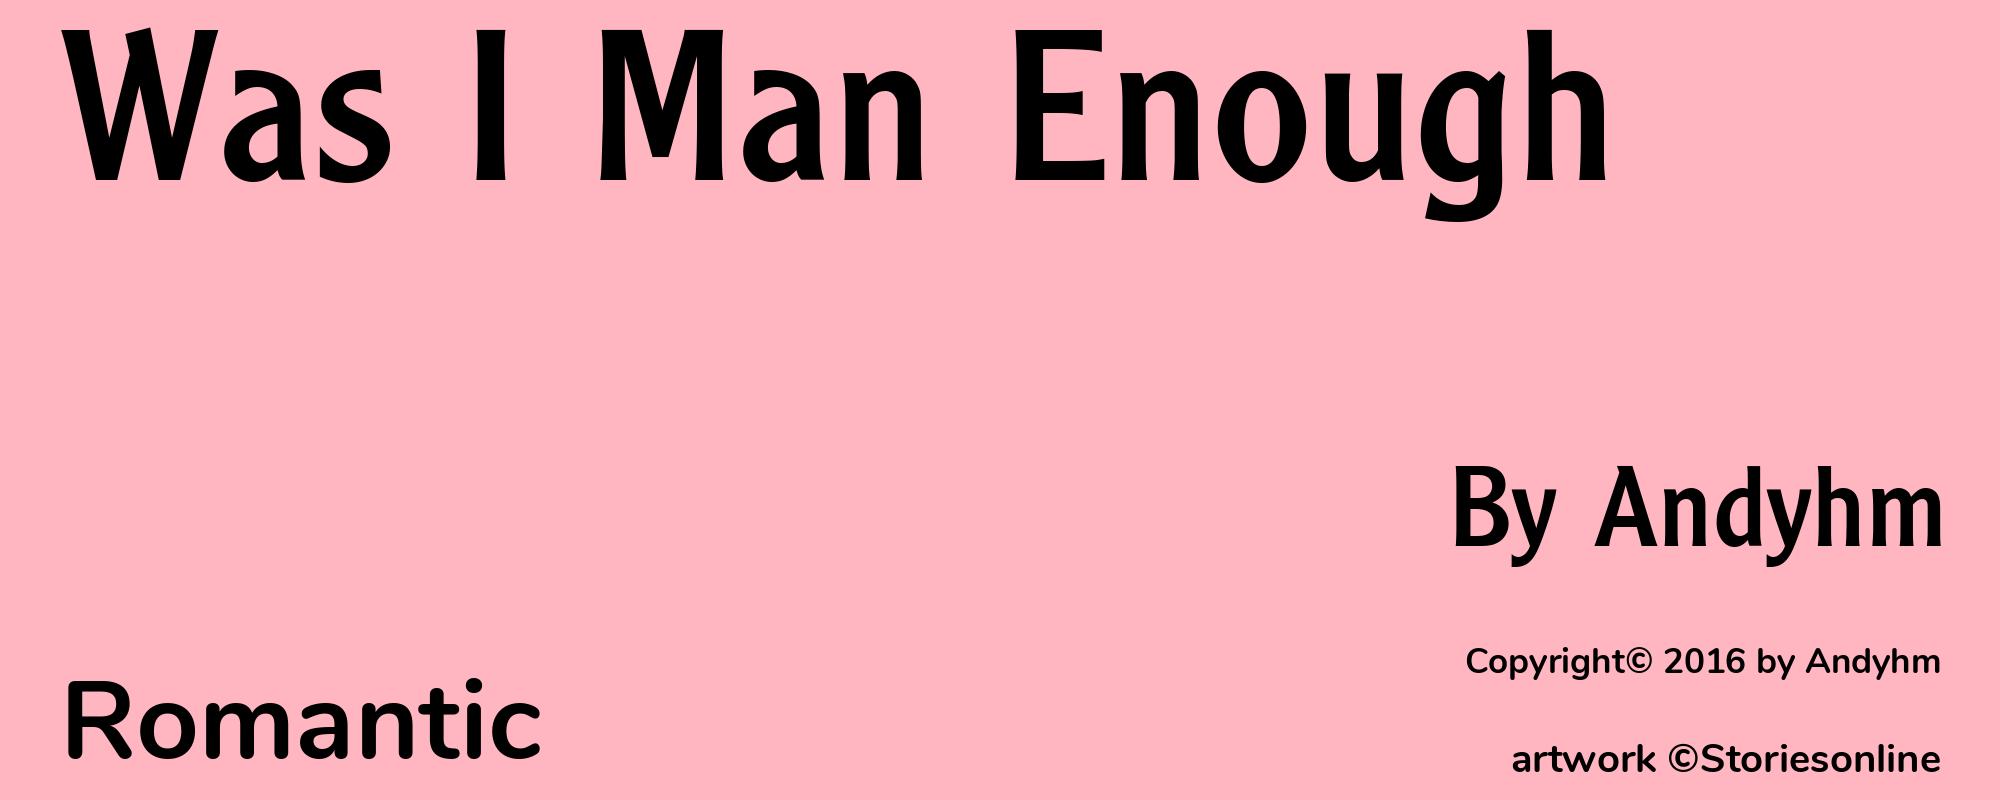 Was I Man Enough - Cover